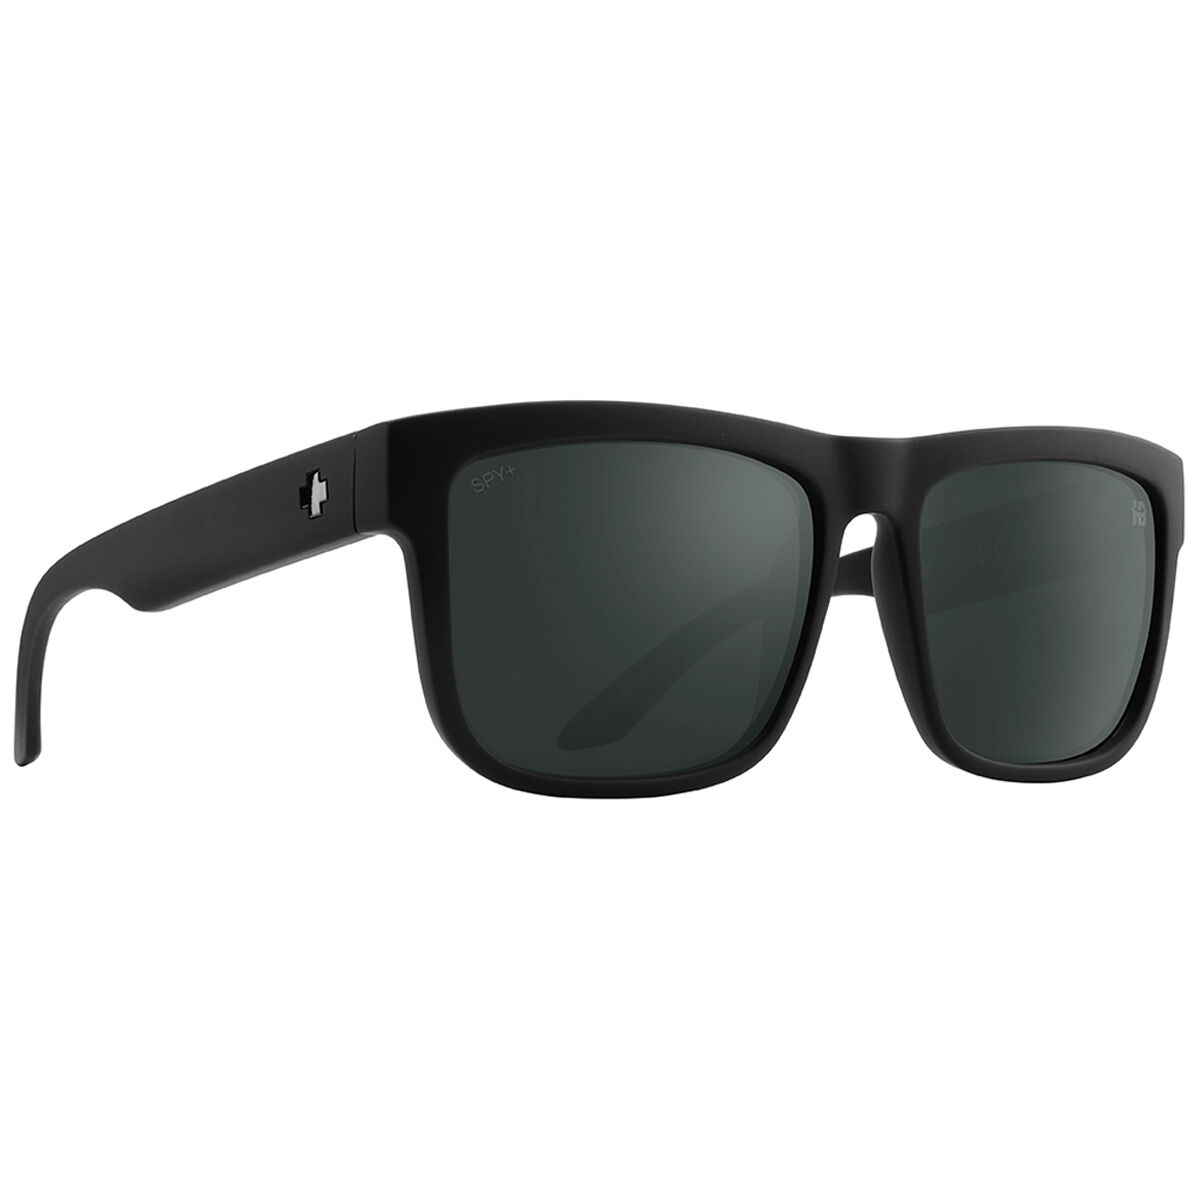 Men's Sunglasses | Spy Optic Official Site by Spy Optic